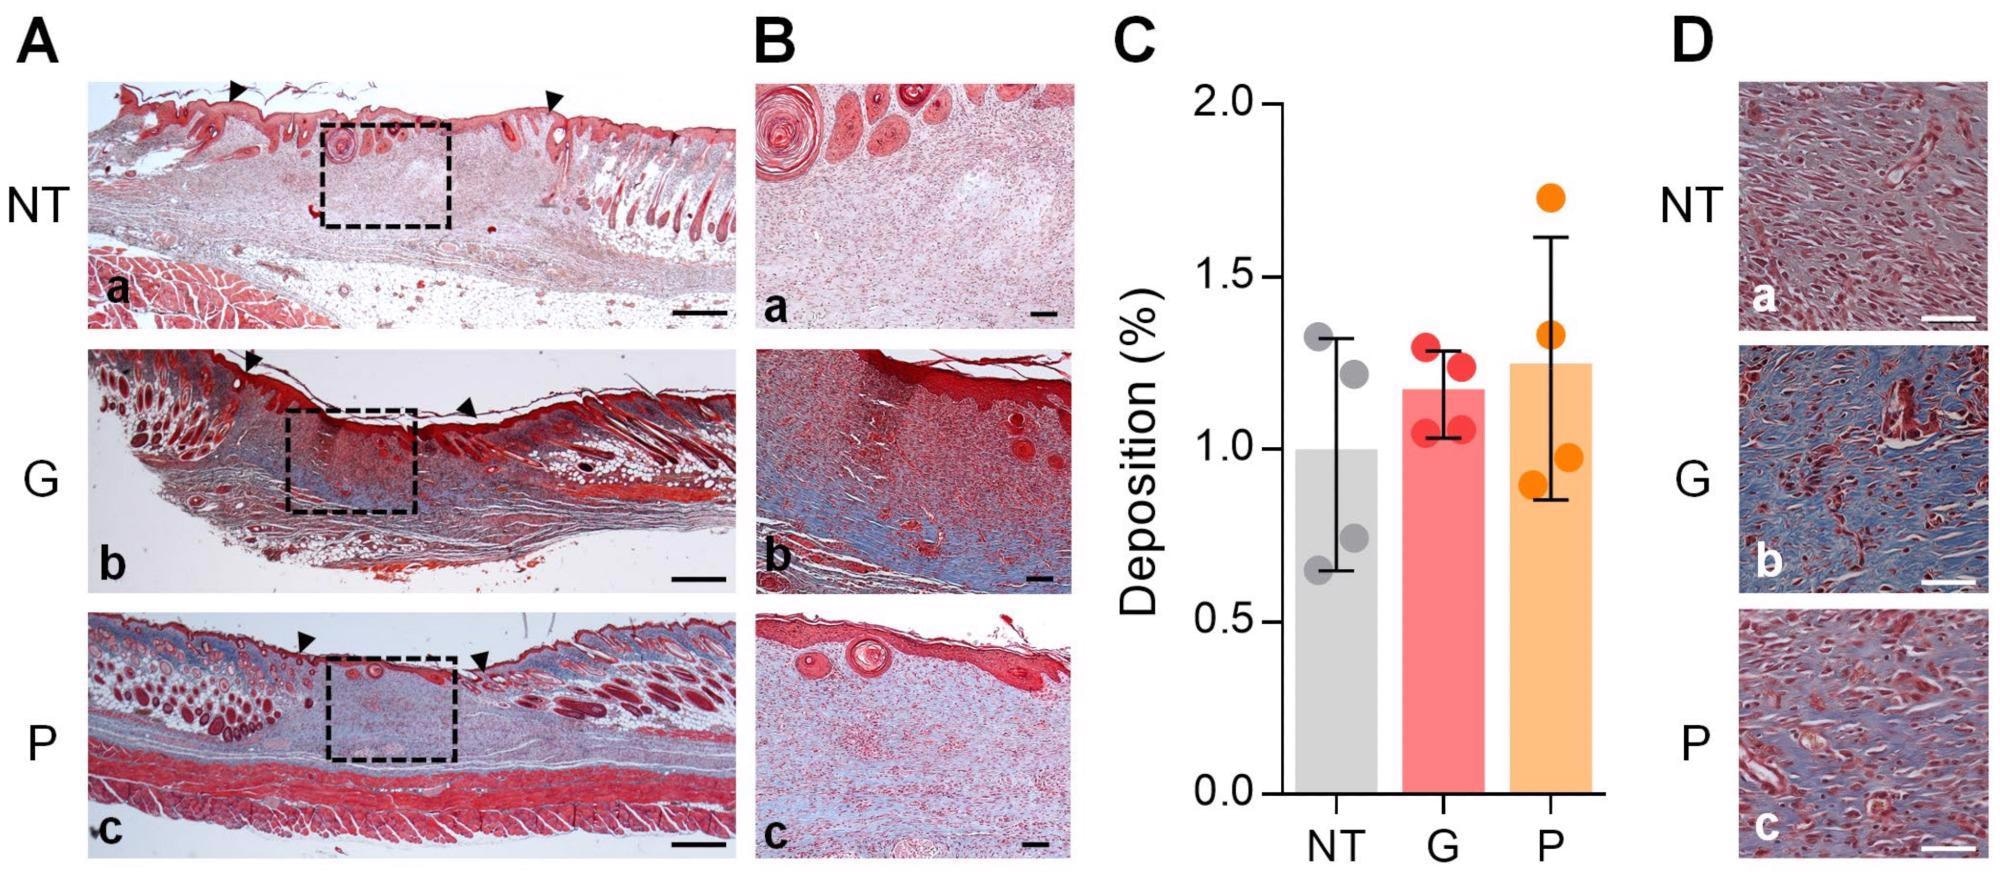 Analysis of collagen deposition in wound tissue. Histological analysis by Masson’s Trichrome is shown. (A,B) The whole wound at 2x magnification (A) and within the wound at 10x magnification (B) is shown for NT (a), gel (b), and powder (c) conditions. Black dashed rectangles demarcate the wound areas shown at higher magnification on the right. Black triangles indicate the wound edges, whereby the wound is located between these markings. Scale bars for (A,B) represent 500 µM and 100 µM, respectively. (C) The ratio of collagen deposition across the wound bed for all treatment groups is displayed. The results are expressed as mean ± standard deviation, n = 4 across all treatment groups. (D) The wounds at 40x magnification are shown for NT (a), gel (b), and powder (c) conditions. The scale bars represent 50 µM.